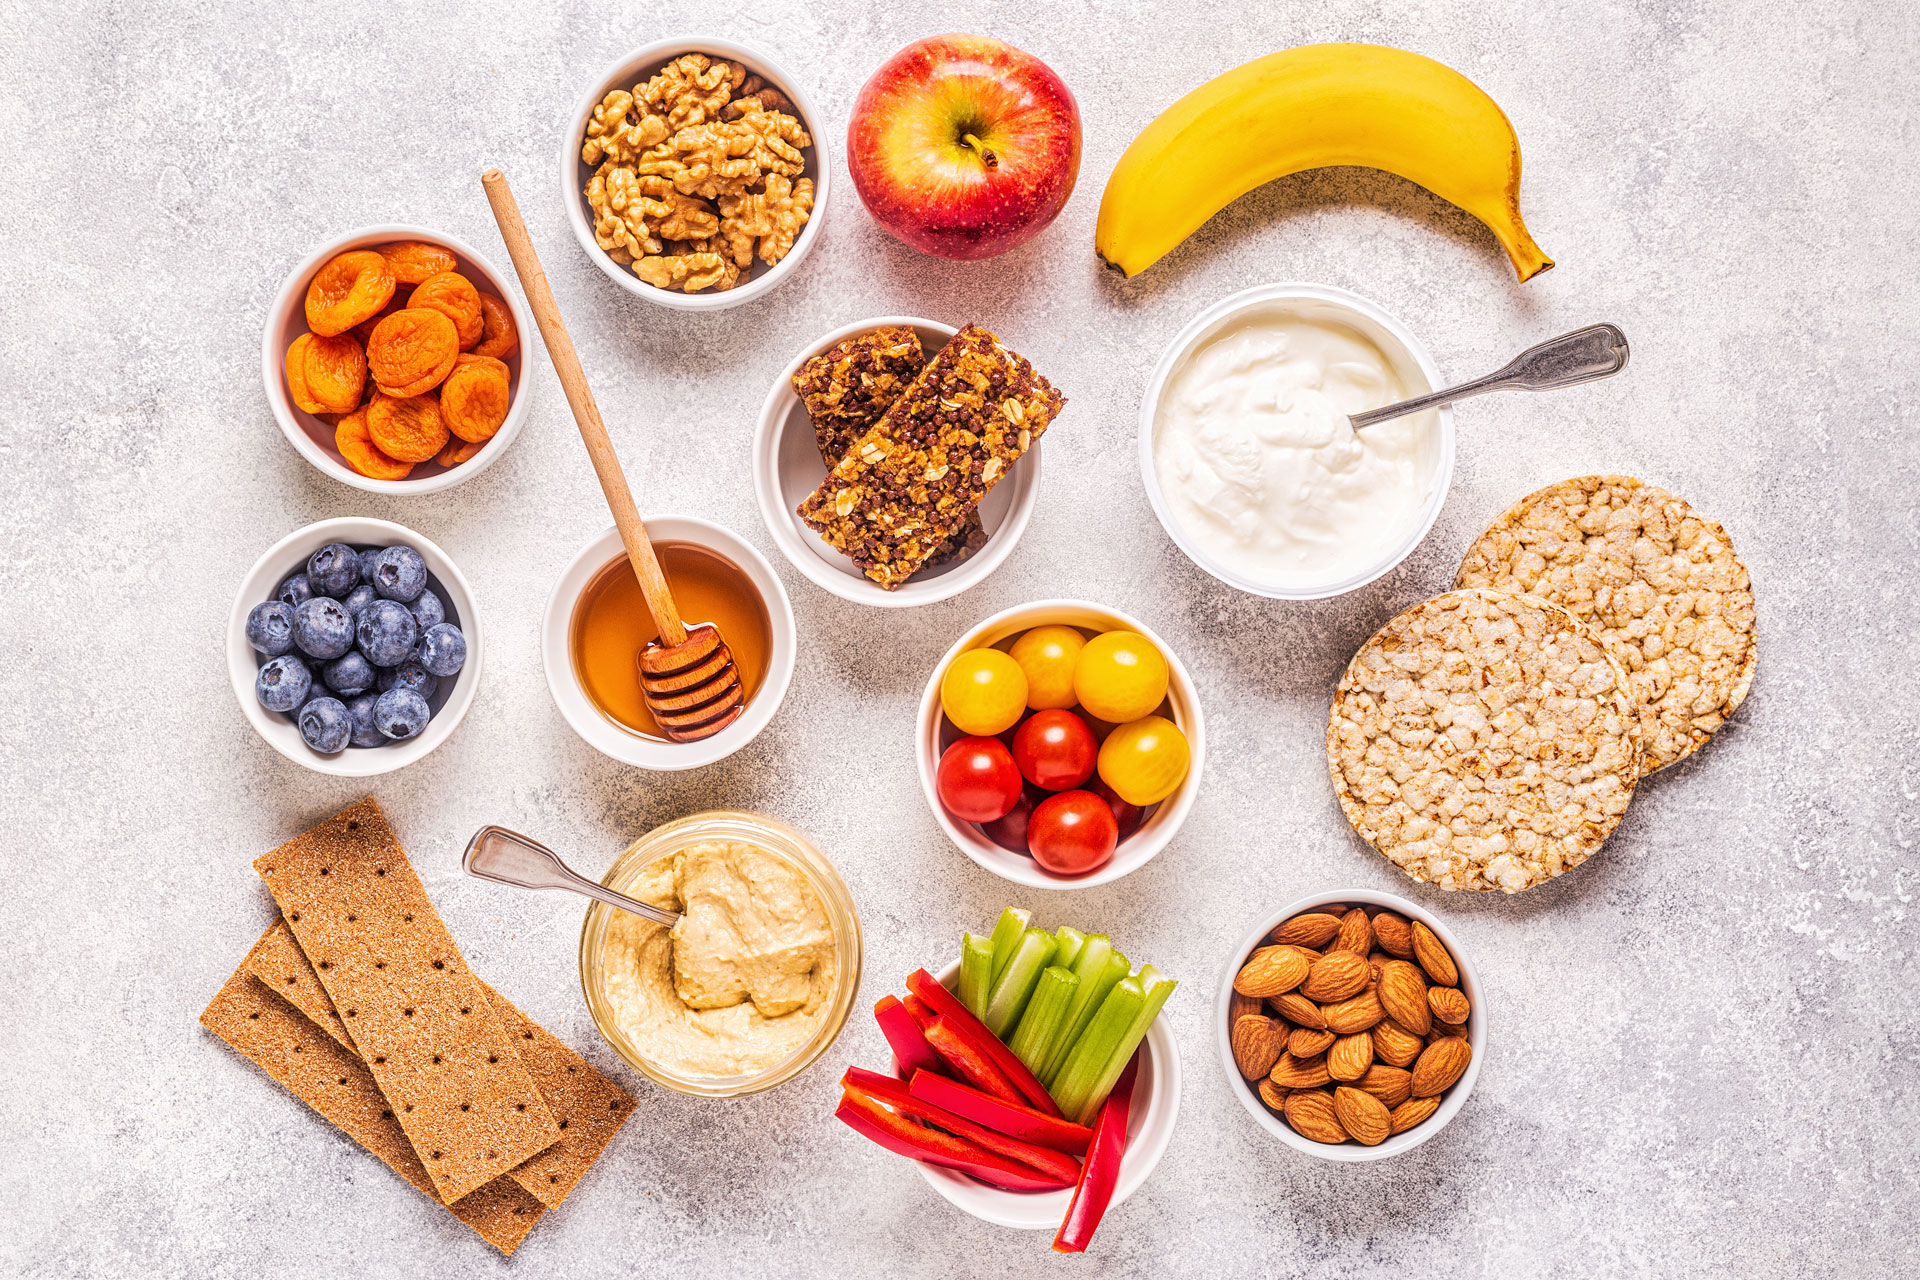 Healthy assortment of snacks that are good for losing weight including fruits, vegetables, nuts, honey, wheat based snacks, and puffed rice cakes. 